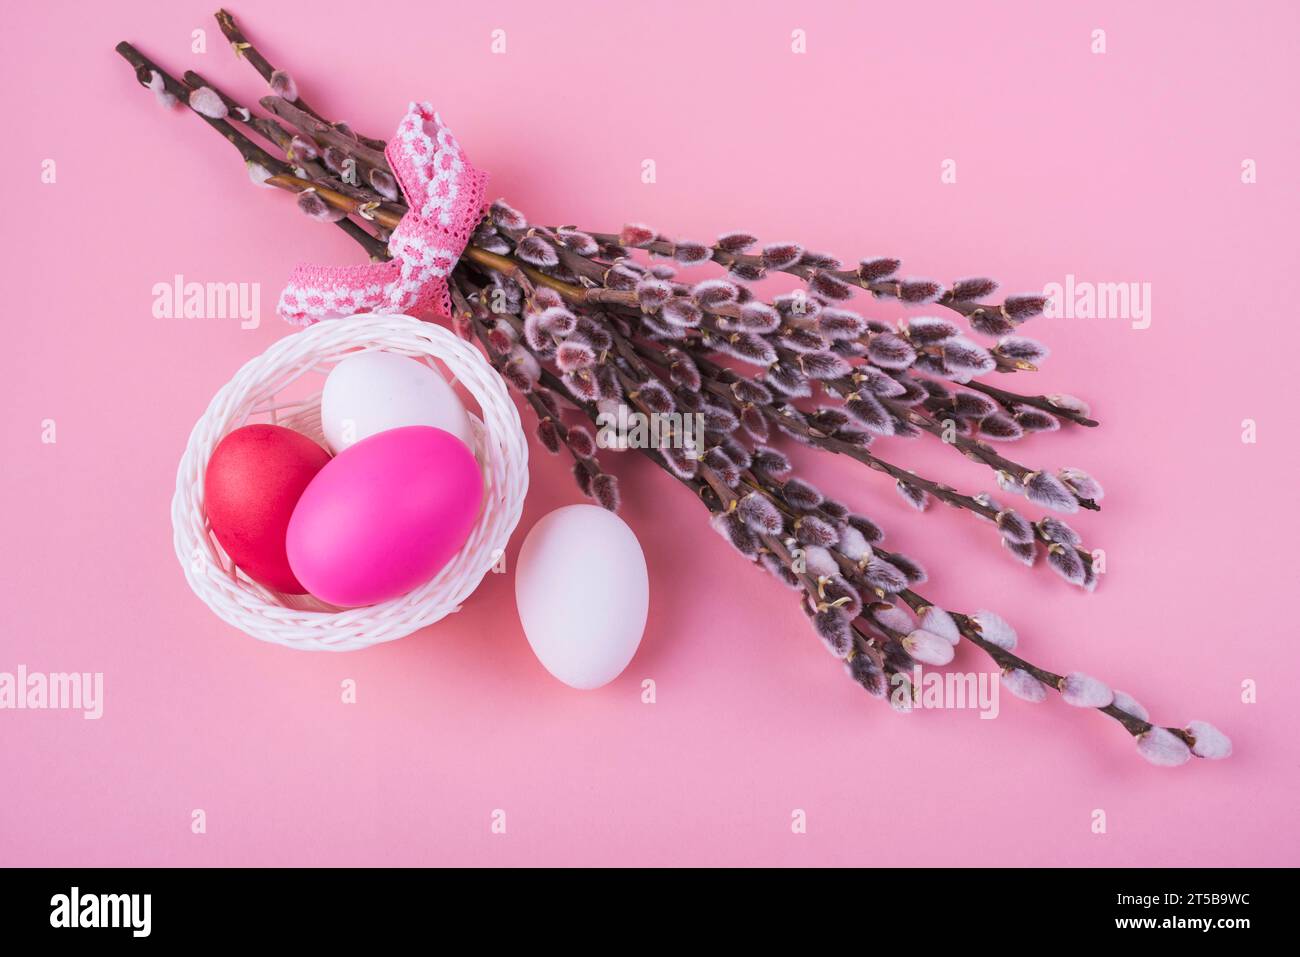 Colorful easter eggs with willow branches Stock Photo